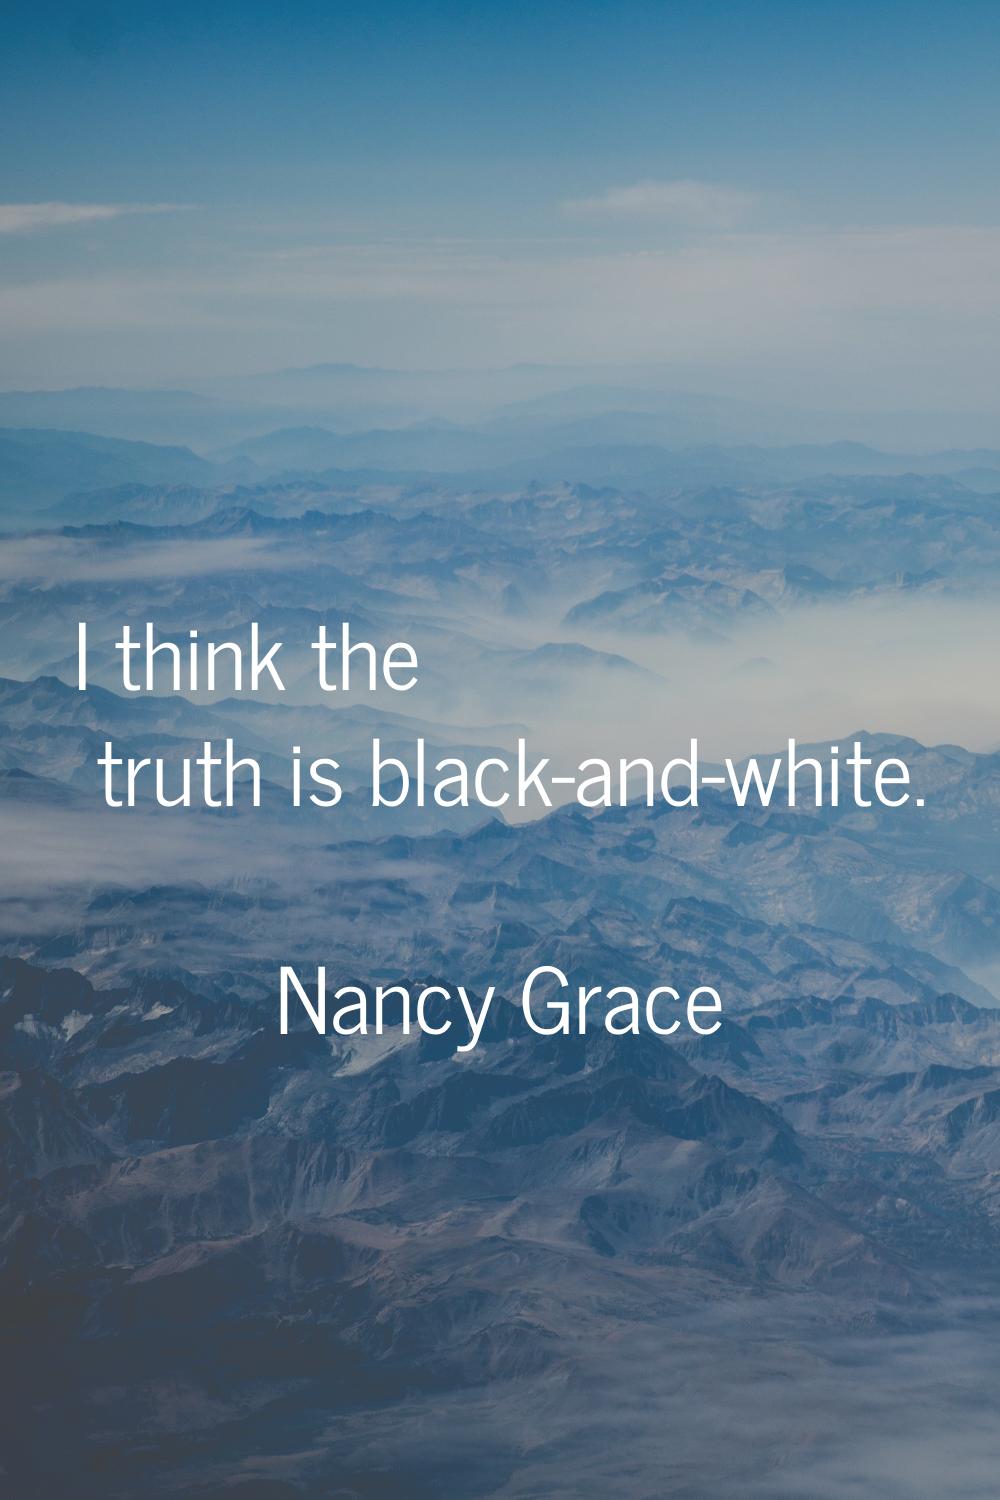 I think the truth is black-and-white.